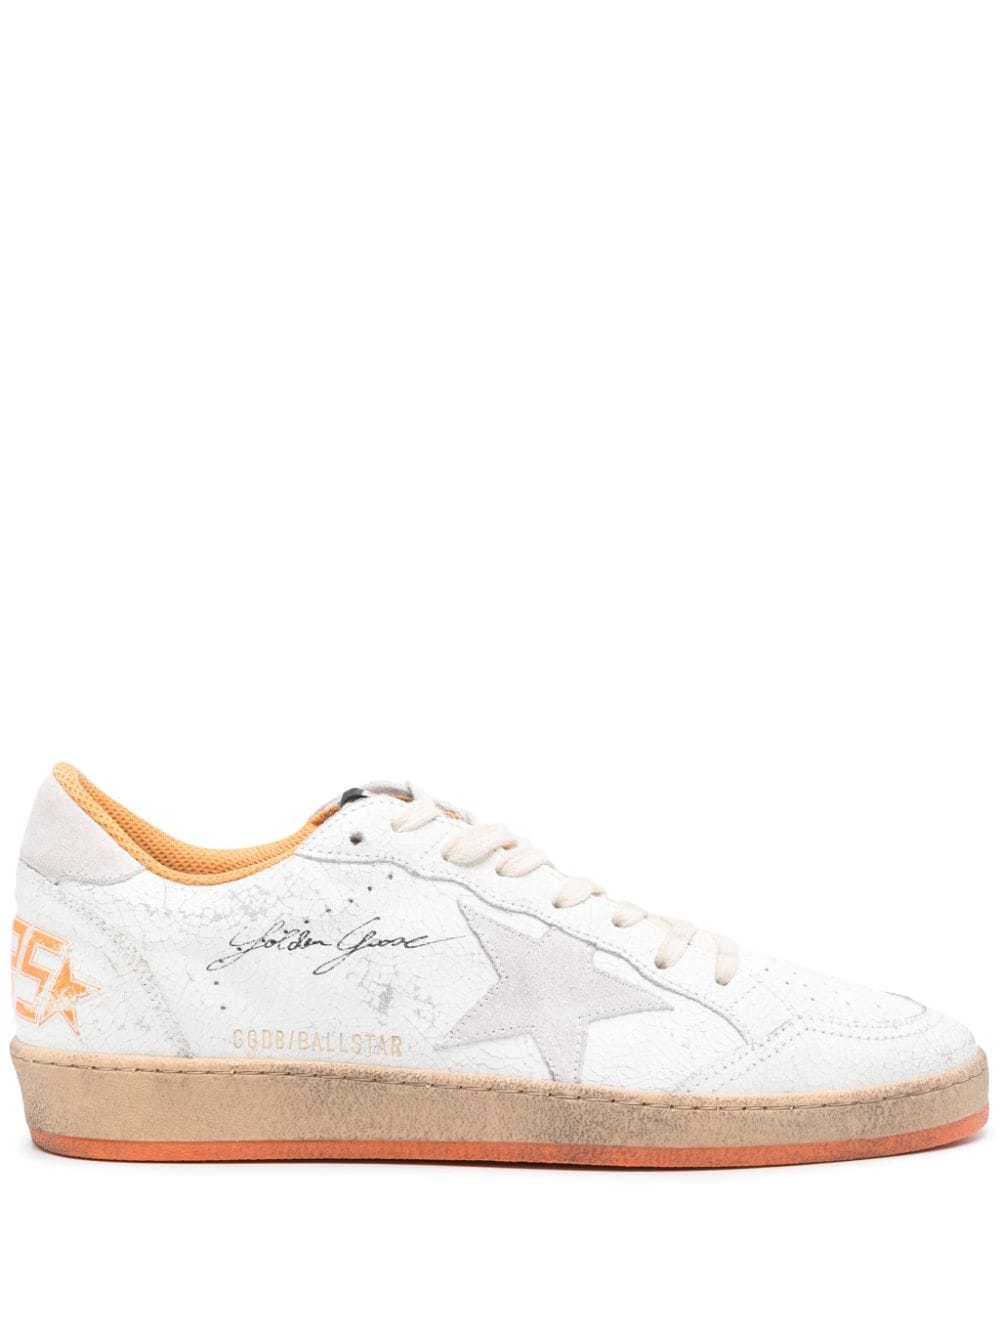 Golden Goose Ball Star Wishes leather sneakers - White von Golden Goose